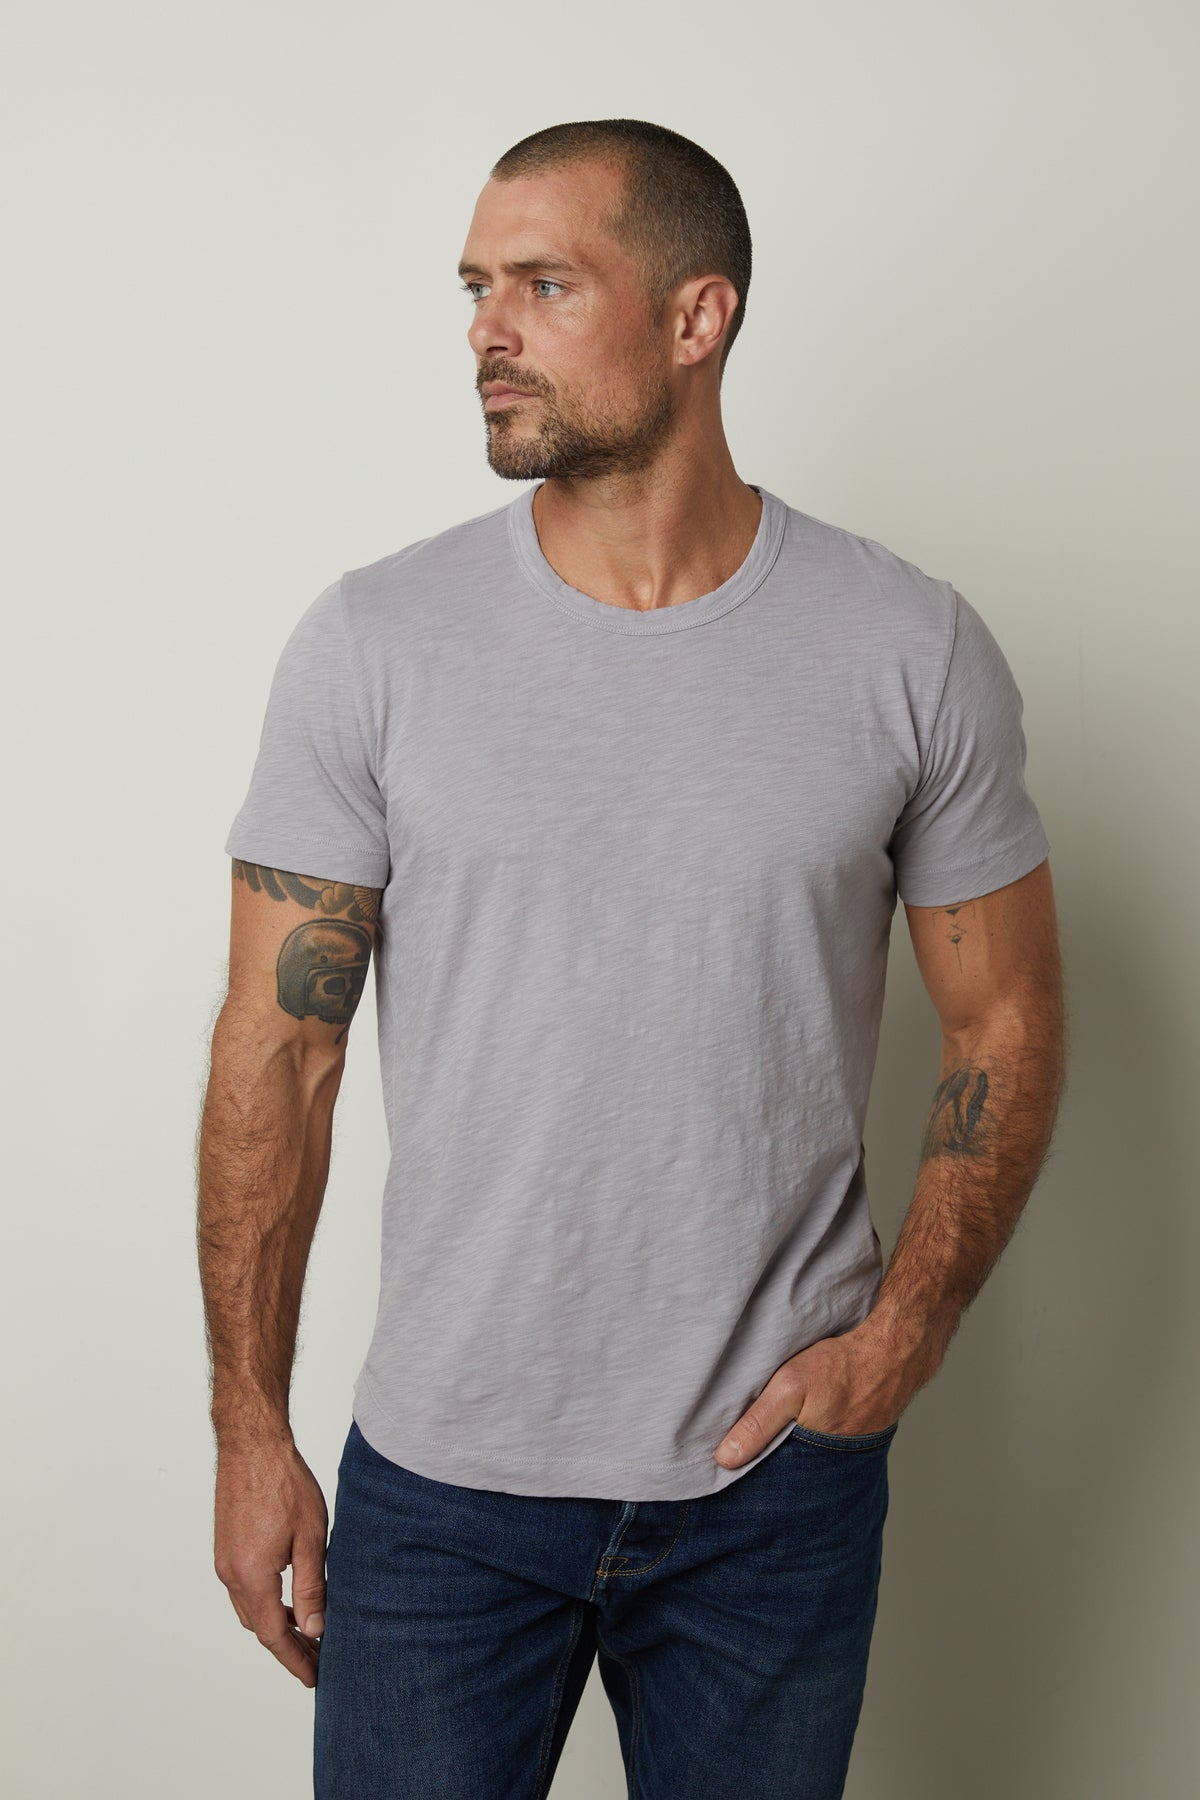 A man wearing a Velvet by Graham & Spencer AMARO CREW NECK SLUB TEE and jeans.-35782657212609